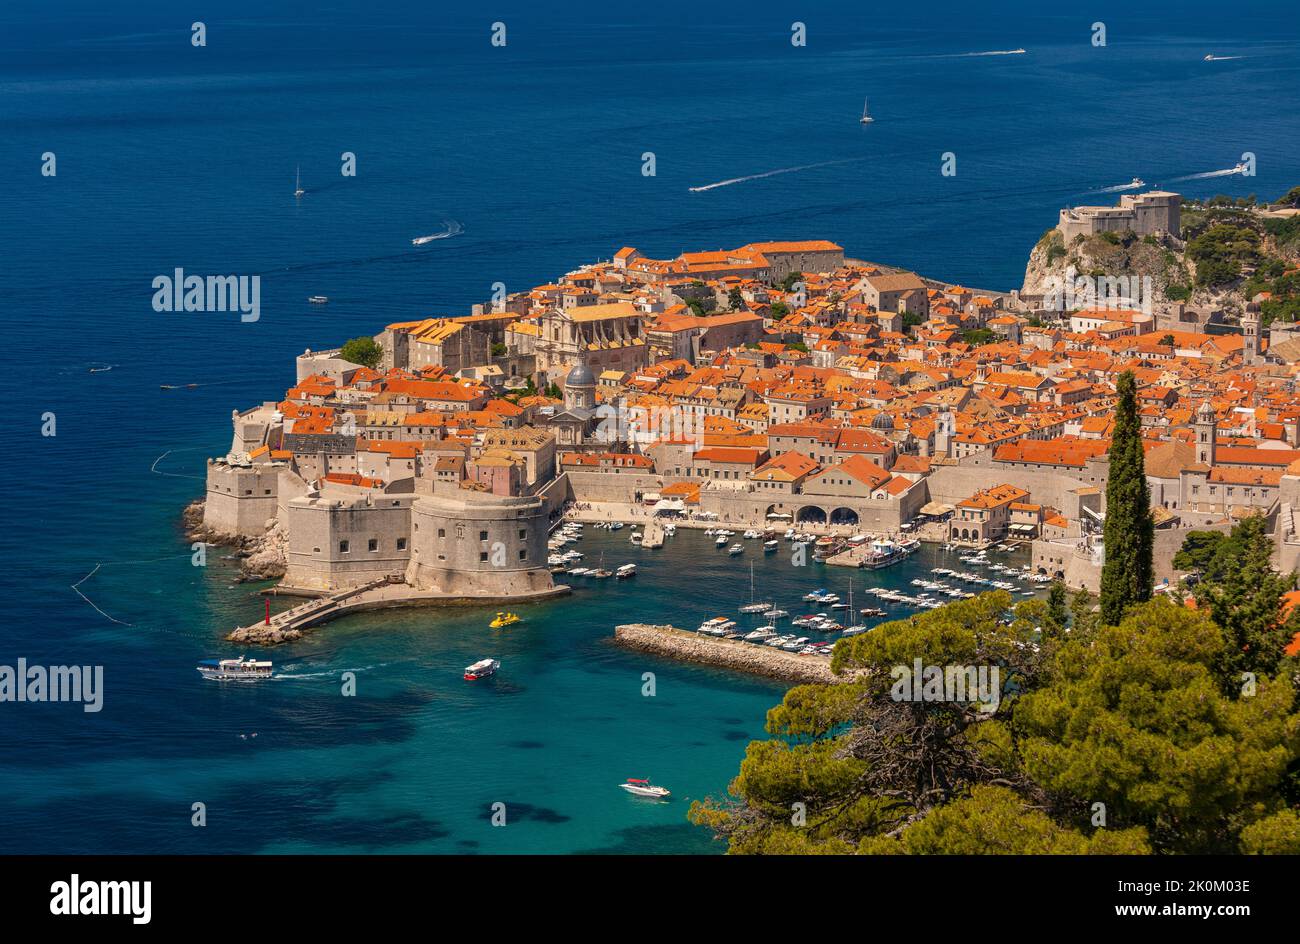 DUBROVNIK, CROATIA, EUROPE - The walled fortress city of Dubrovnik, aerial view, on the Dalmation coast. Stock Photo